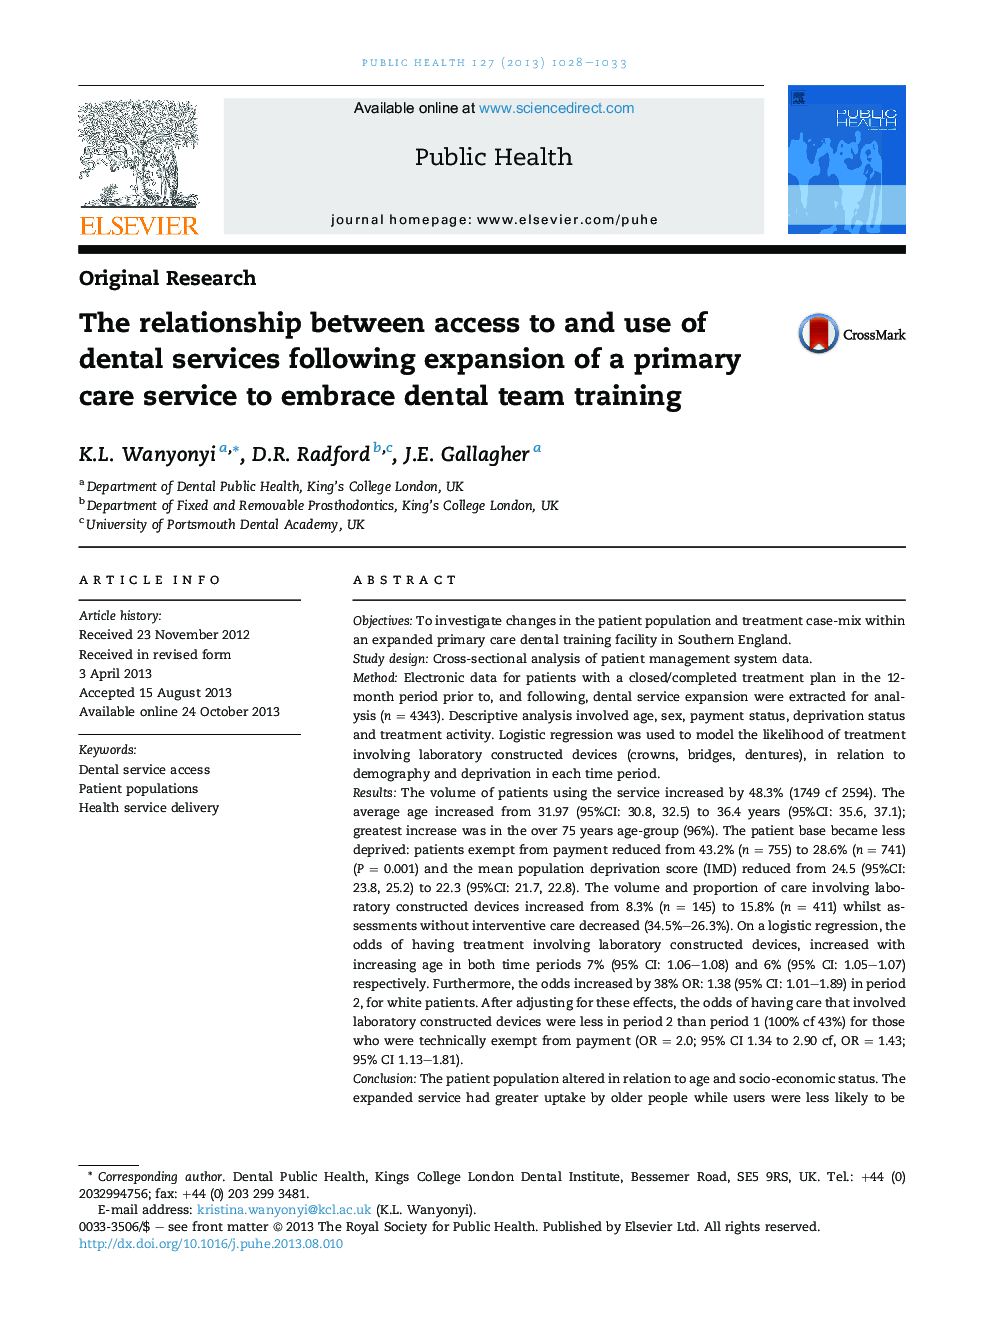 The relationship between access to and use of dental services following expansion of a primary care service to embrace dental team training